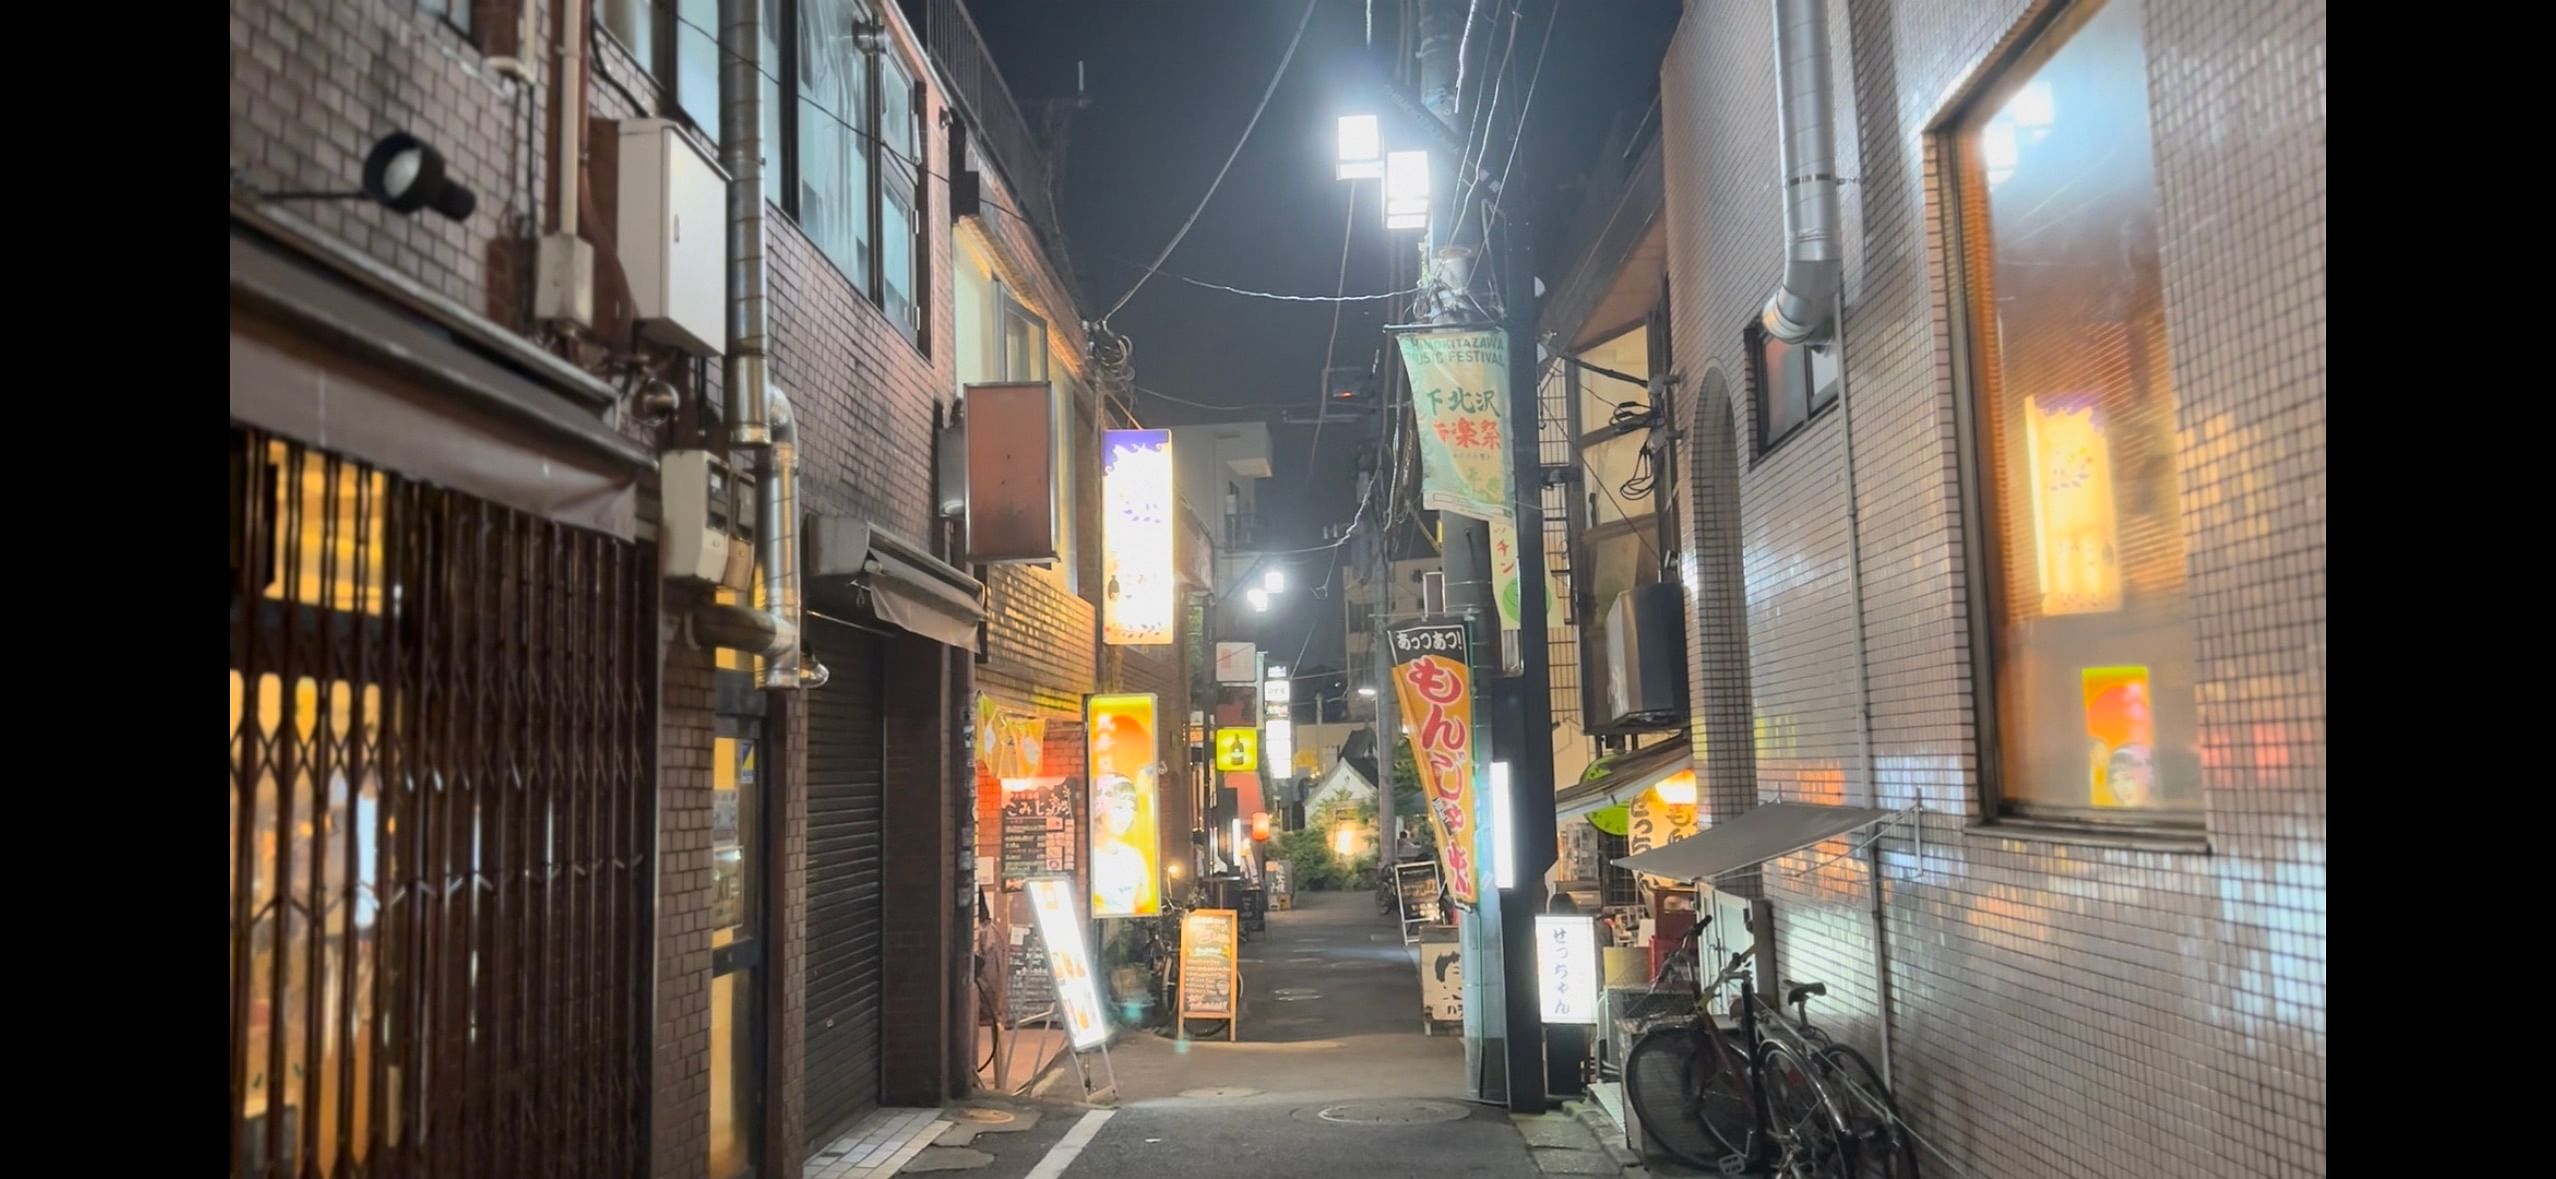 Shimokitazawa(Retro town),Tokyo【A place only locals know about】Bar Hopping/pub-crawl